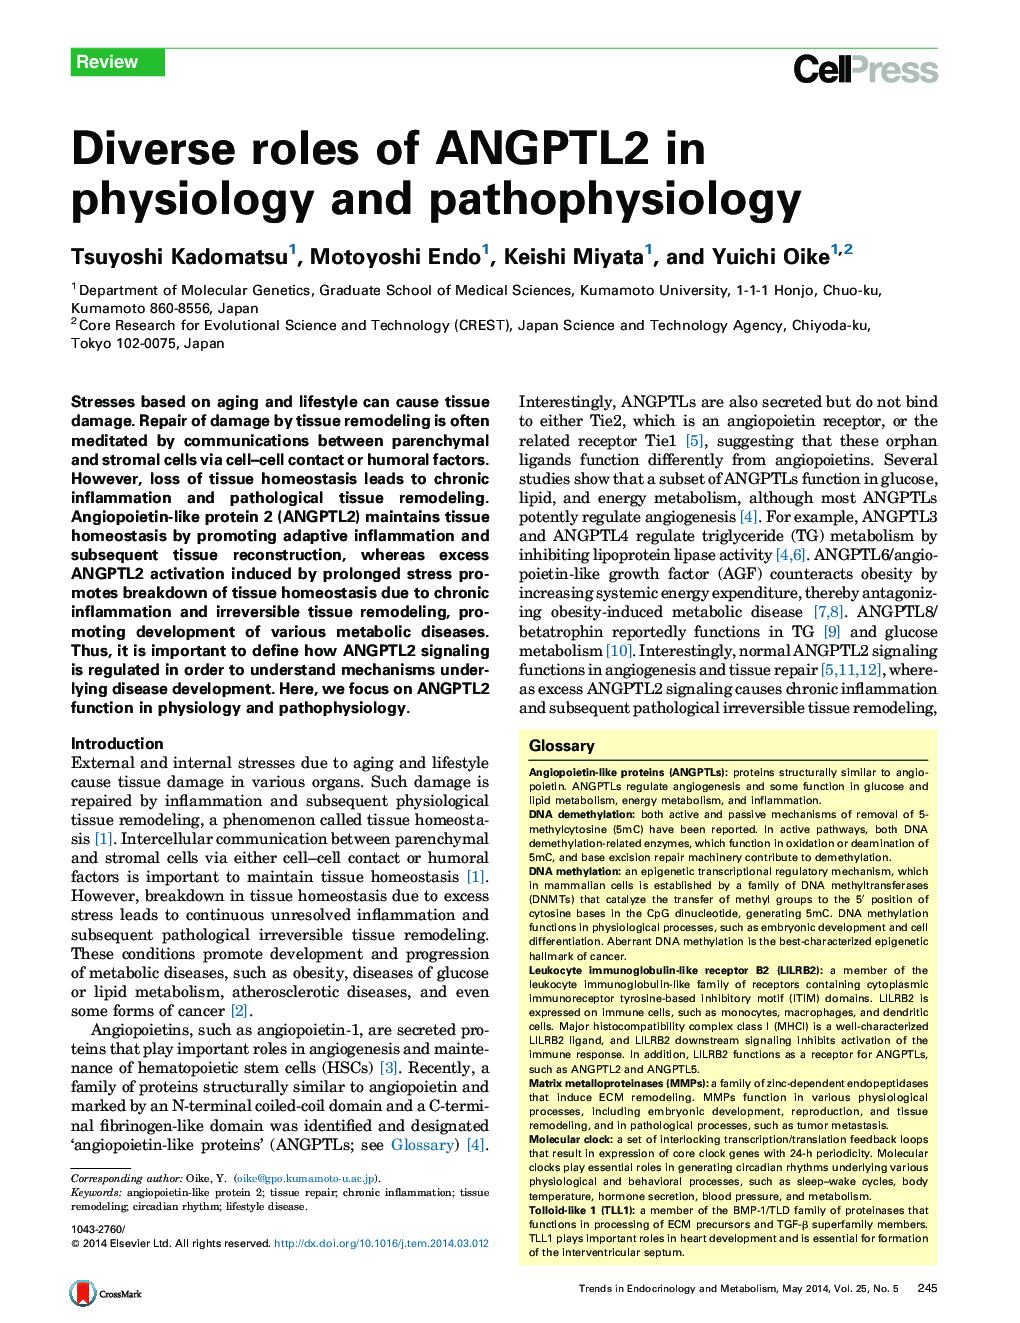 Diverse roles of ANGPTL2 in physiology and pathophysiology